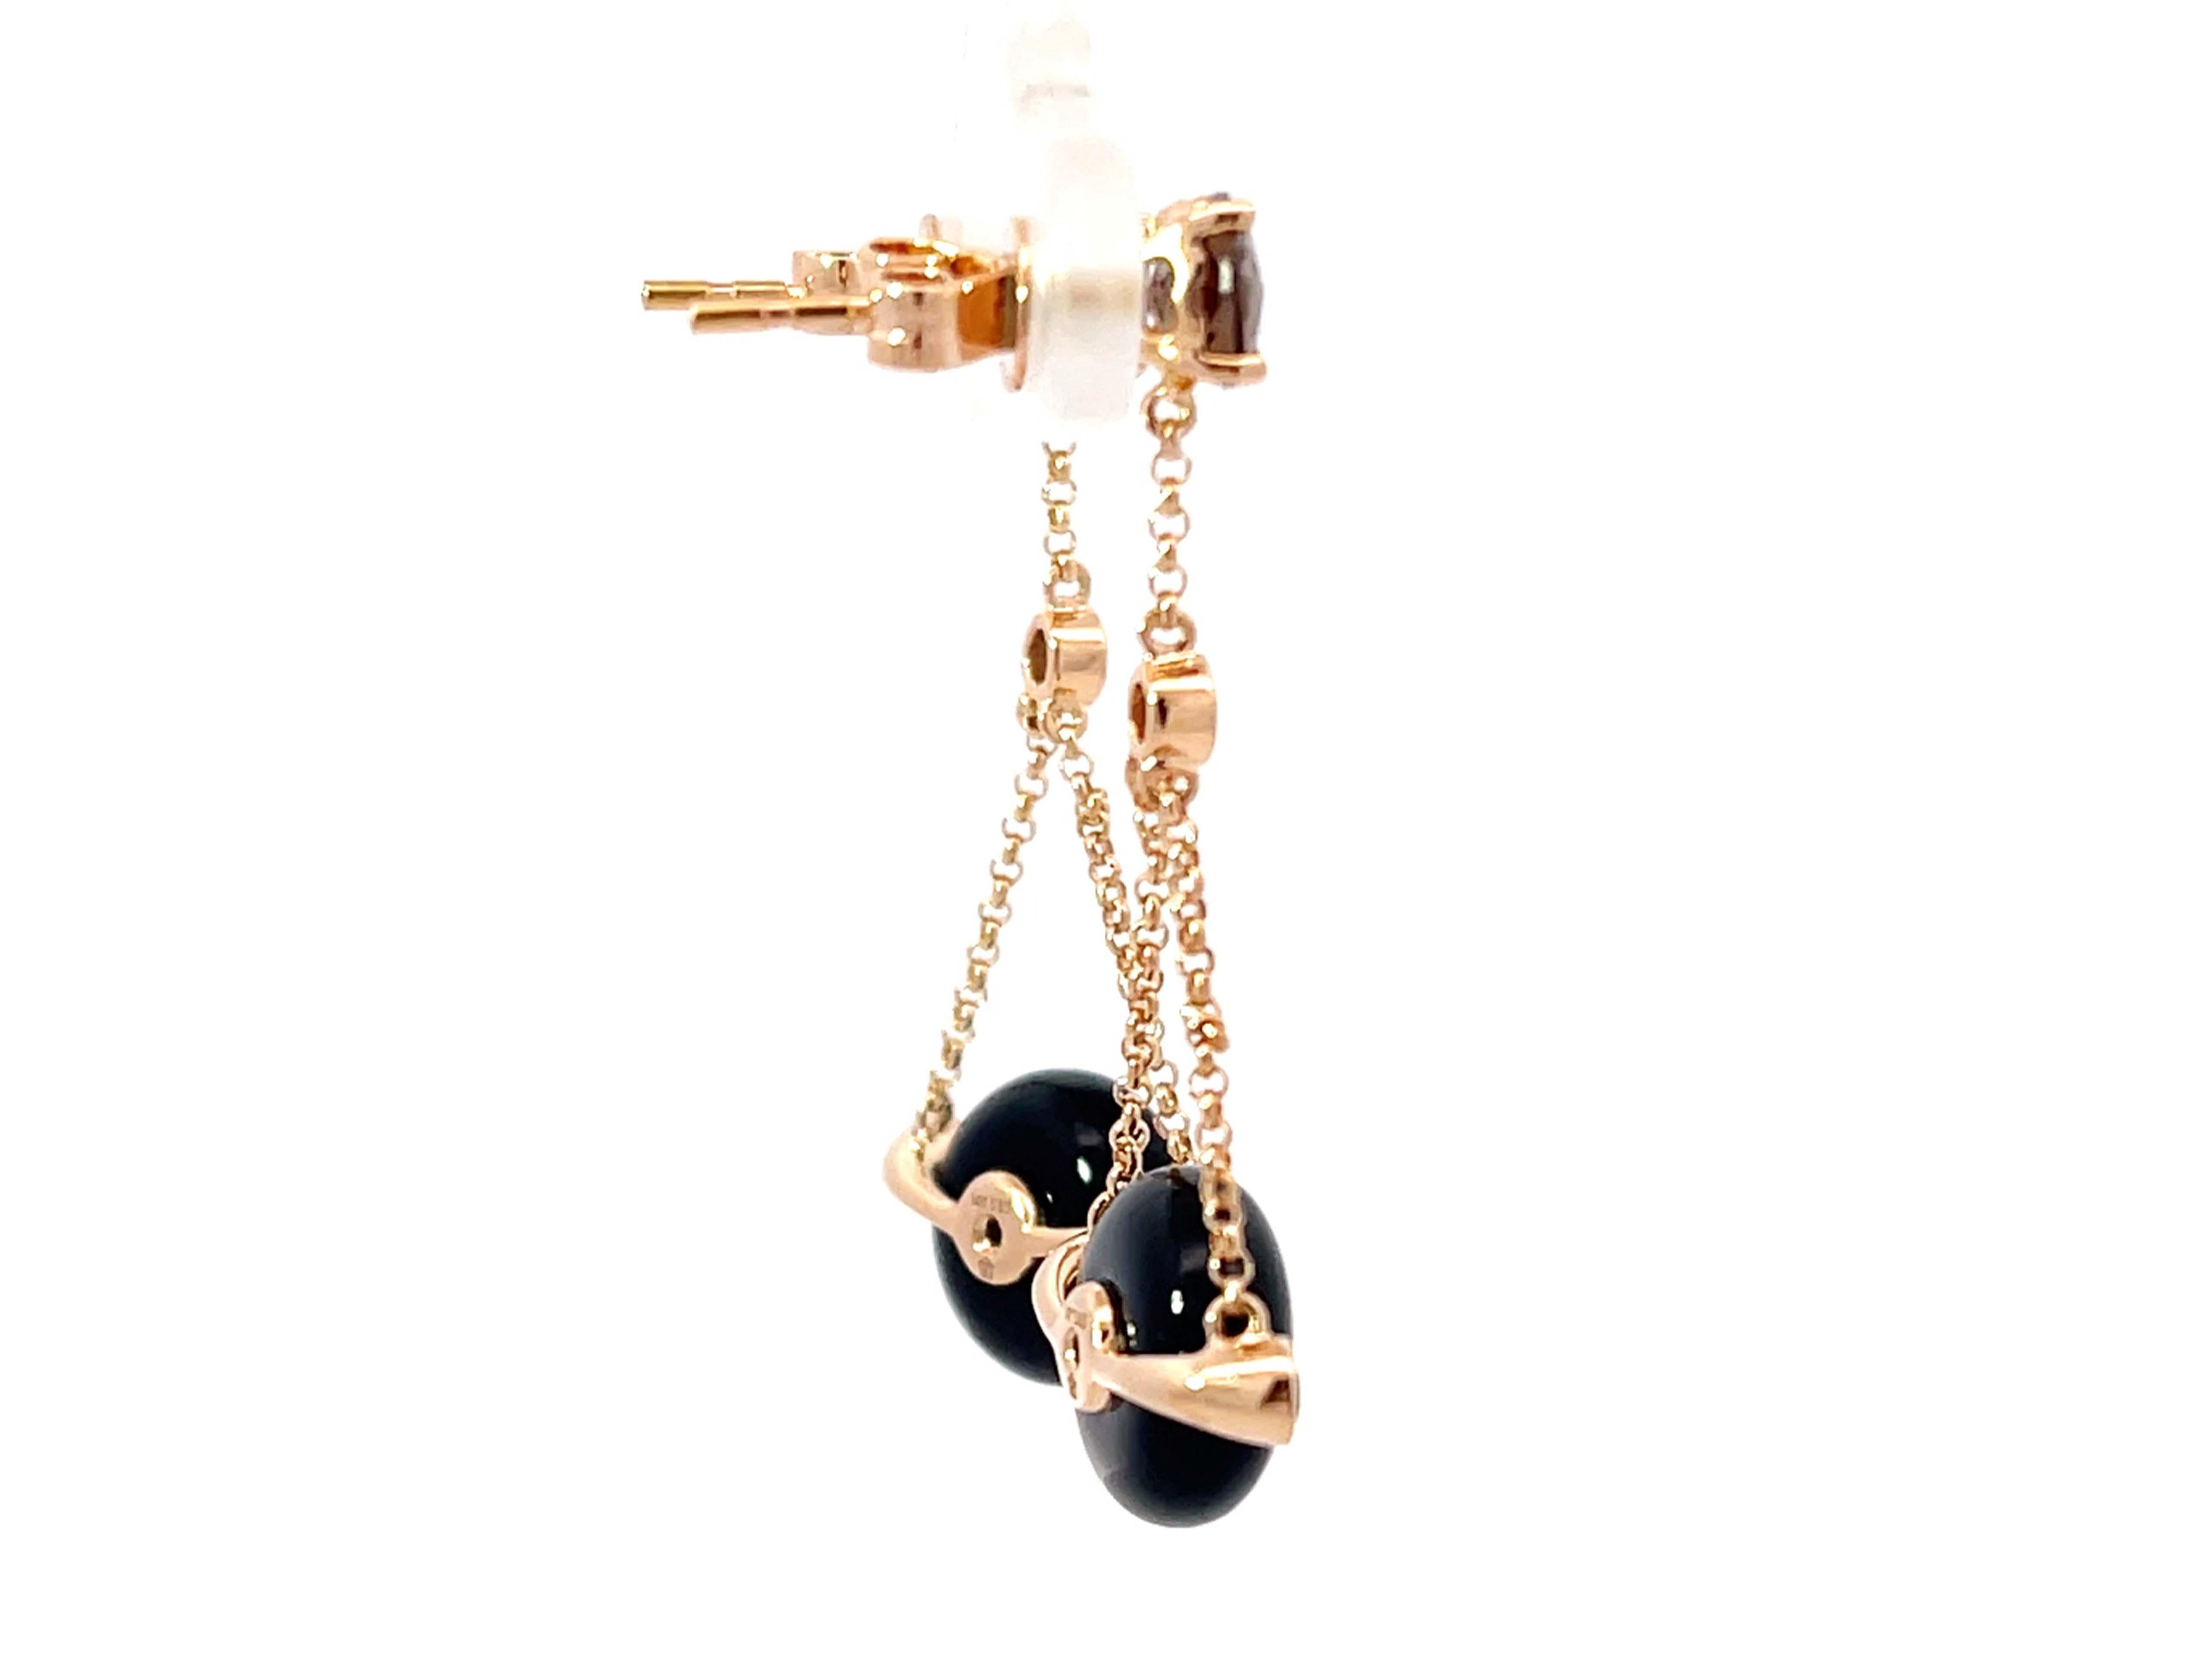 Round Black Agate Diamond and Smoky Topaz Dangly Earrings 14k Rose Gold In Excellent Condition For Sale In Honolulu, HI